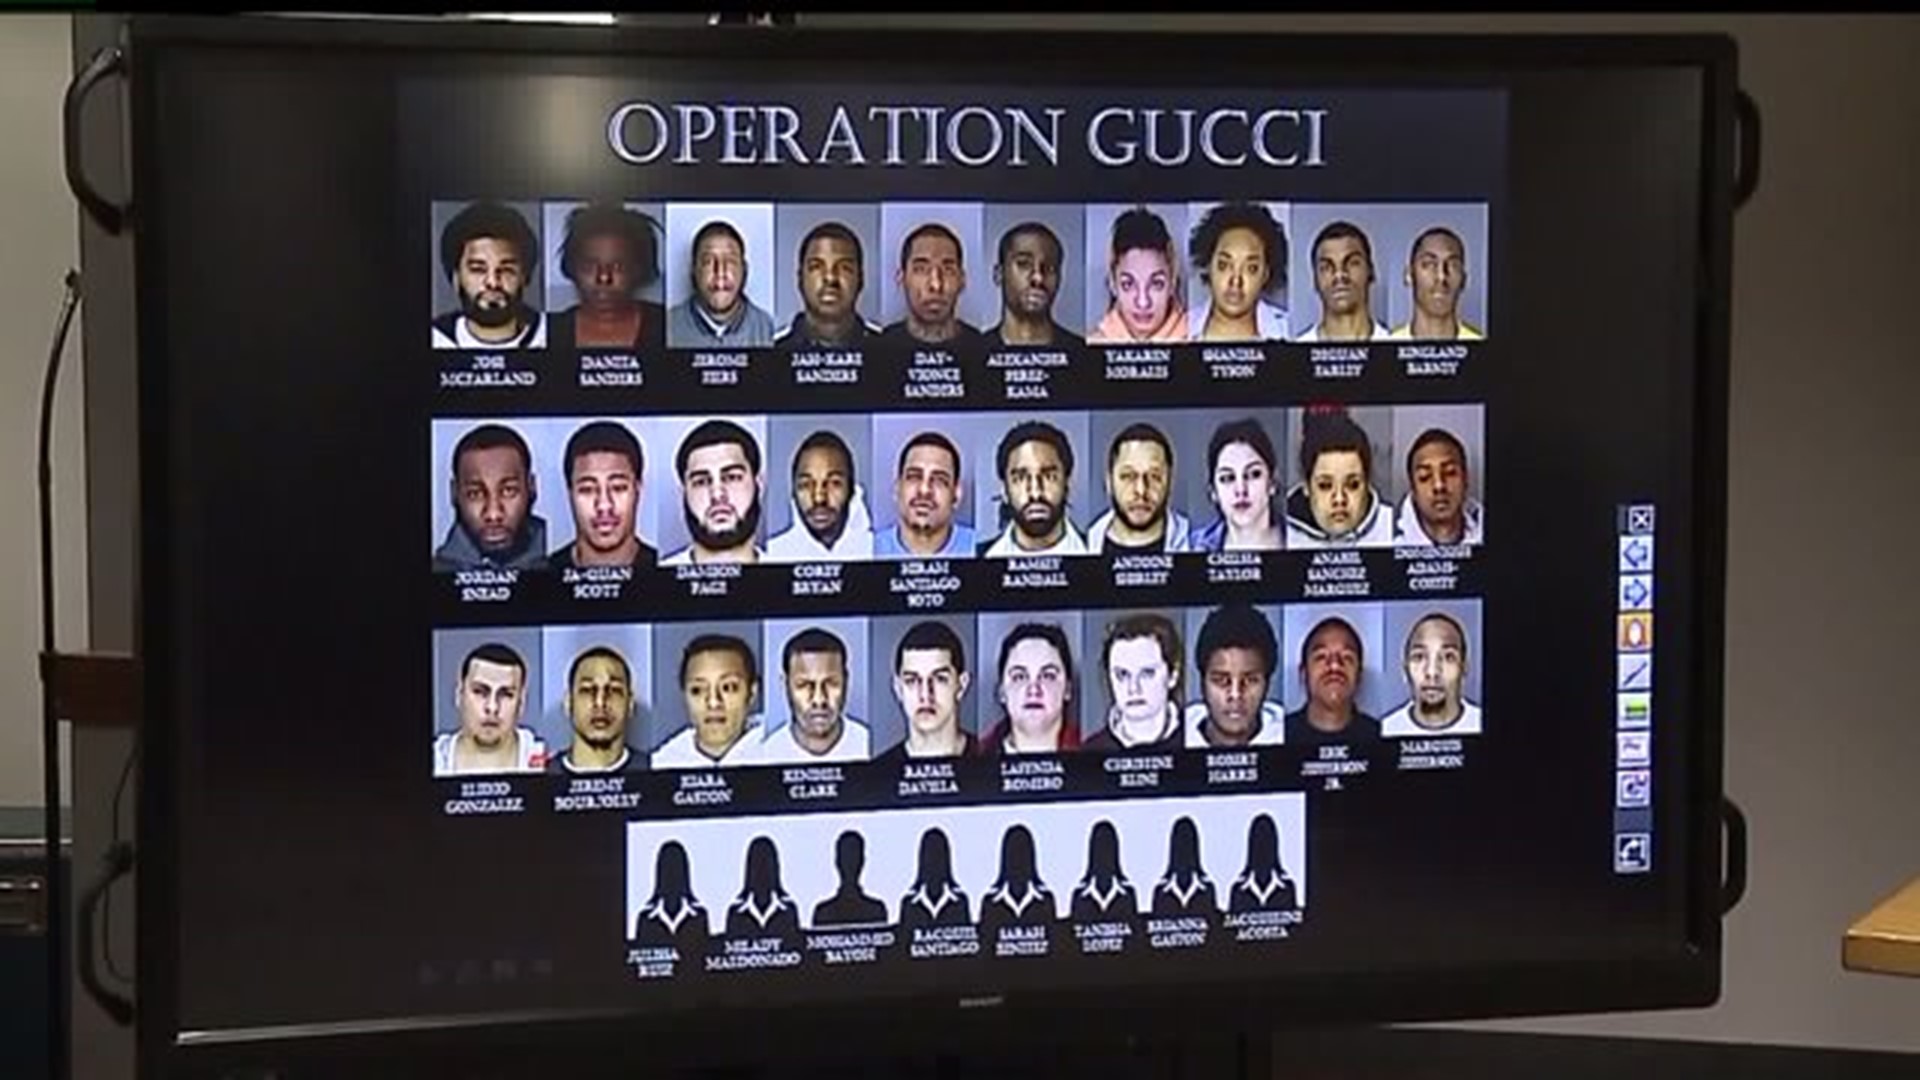 "Operation Gucci" busts dozens of thieves